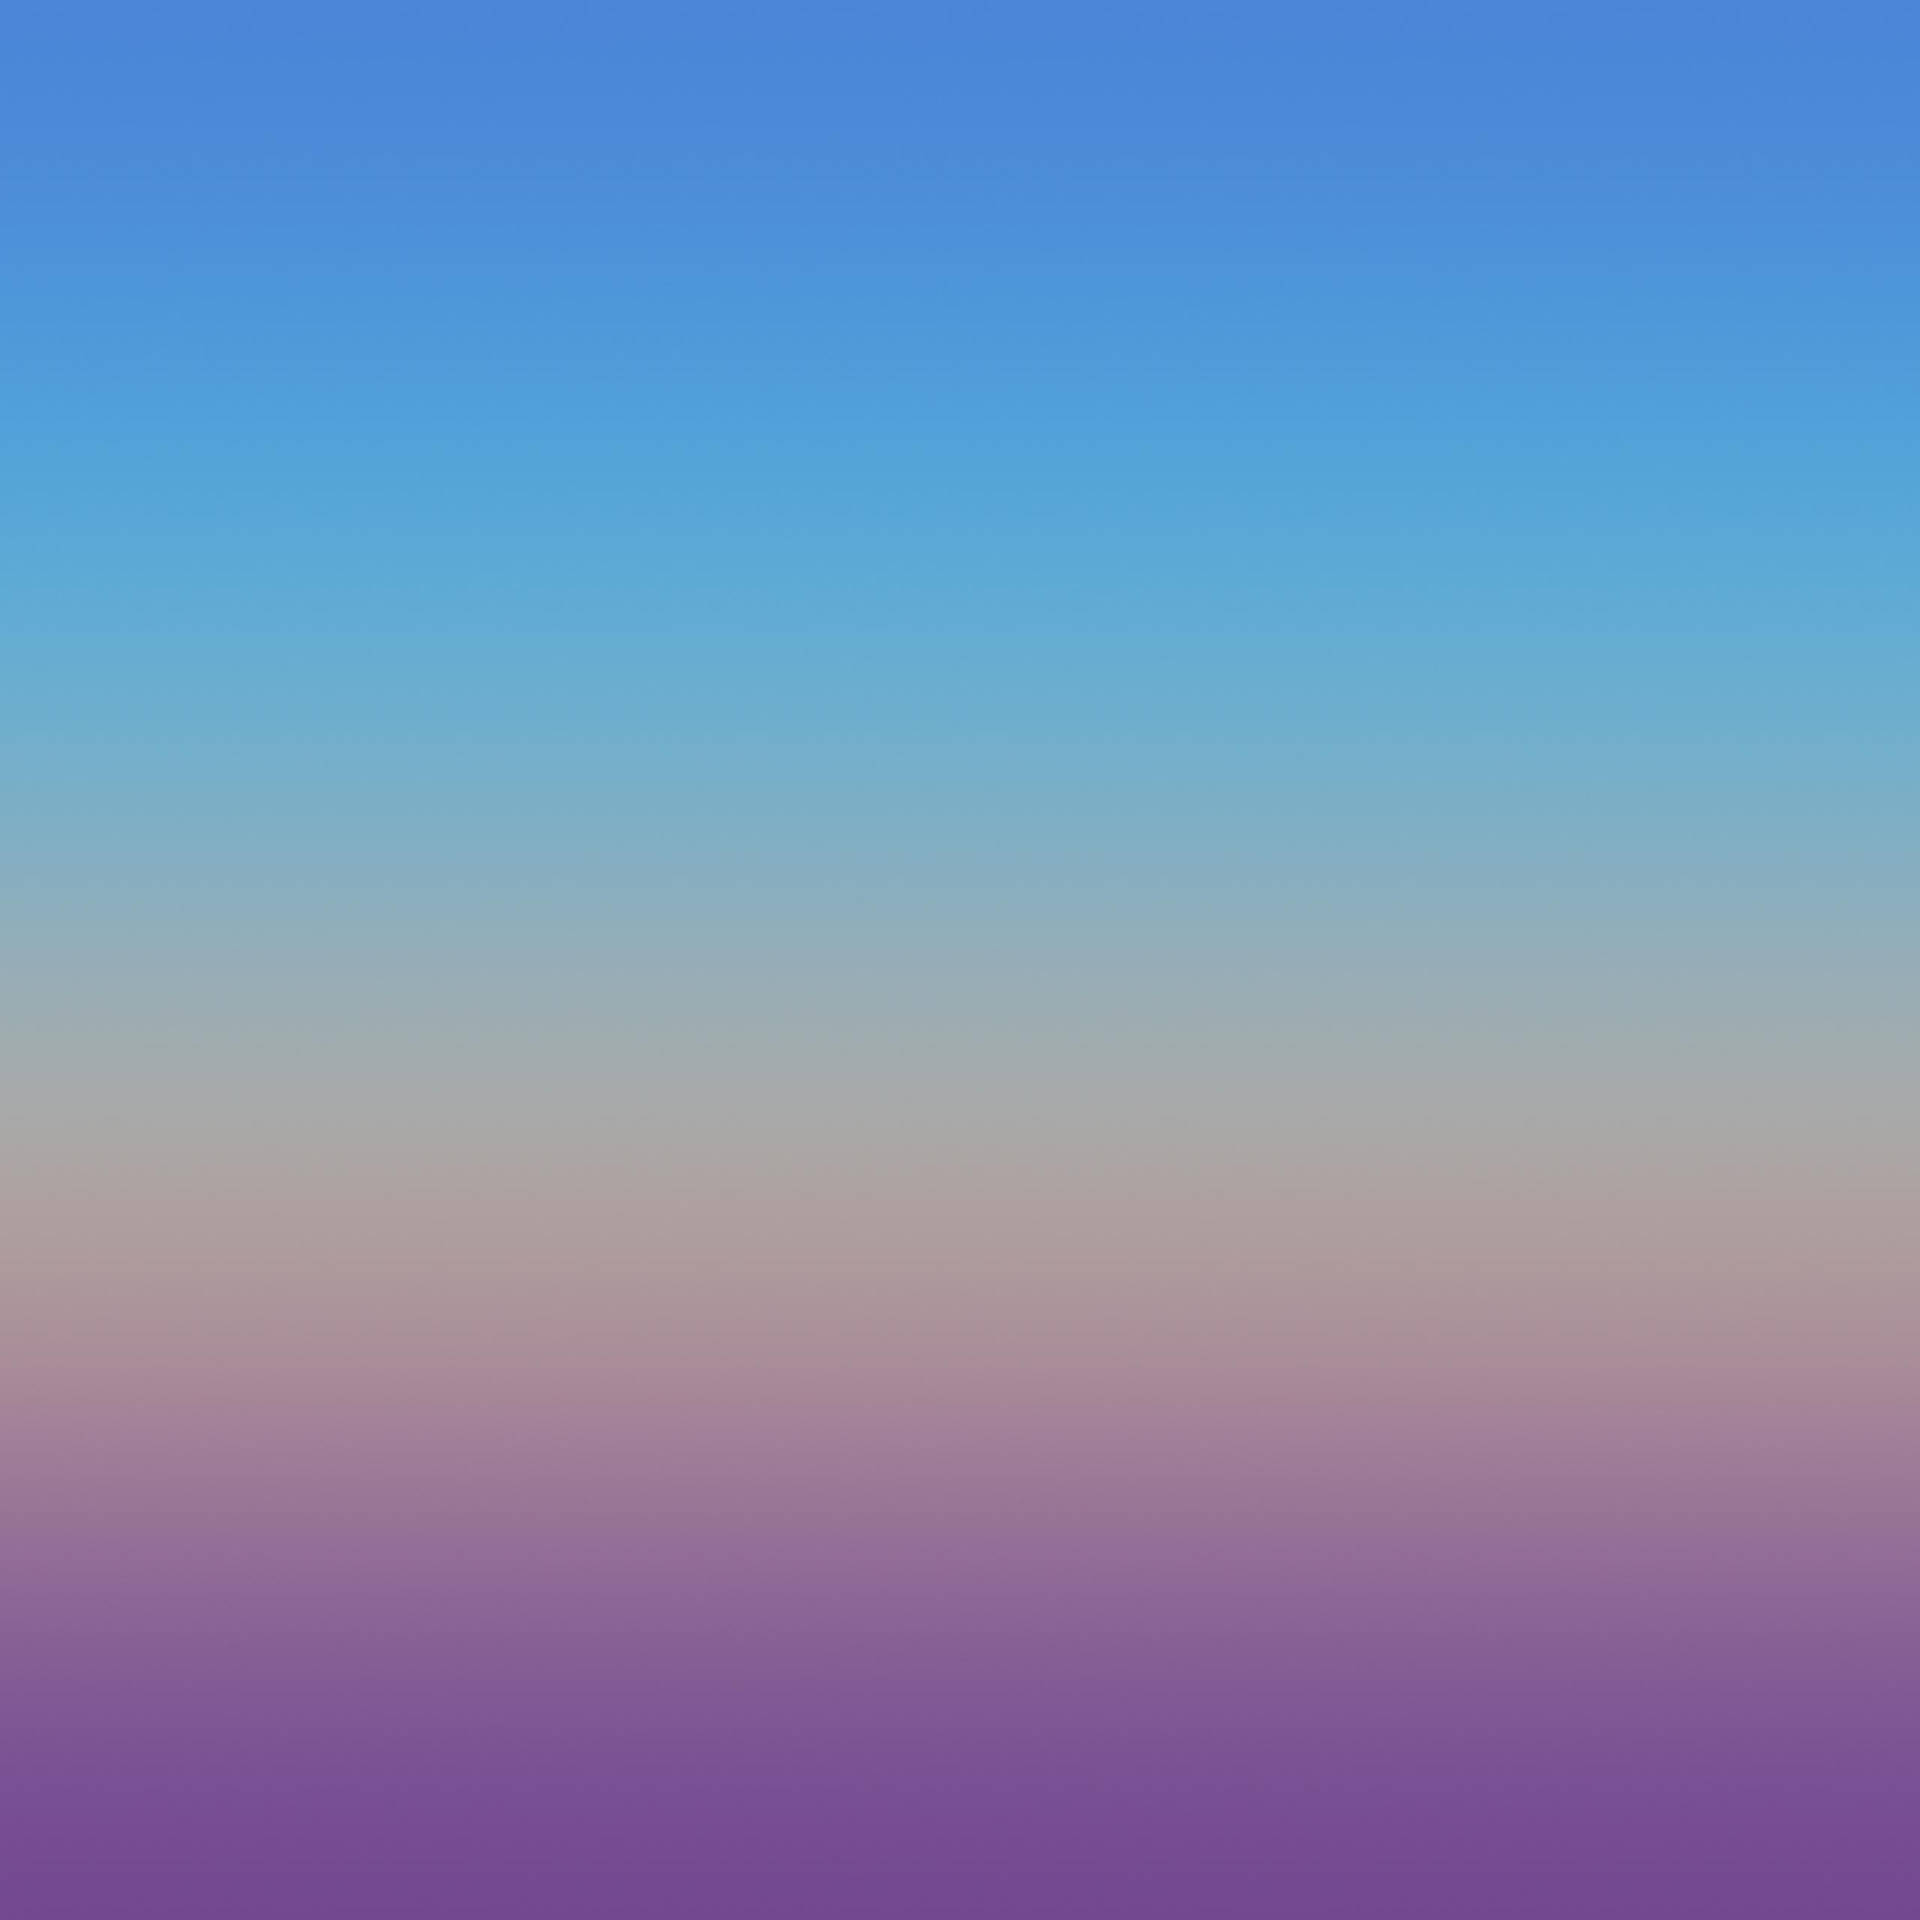 Blue And Violet Samsung Galaxy Tablet Background